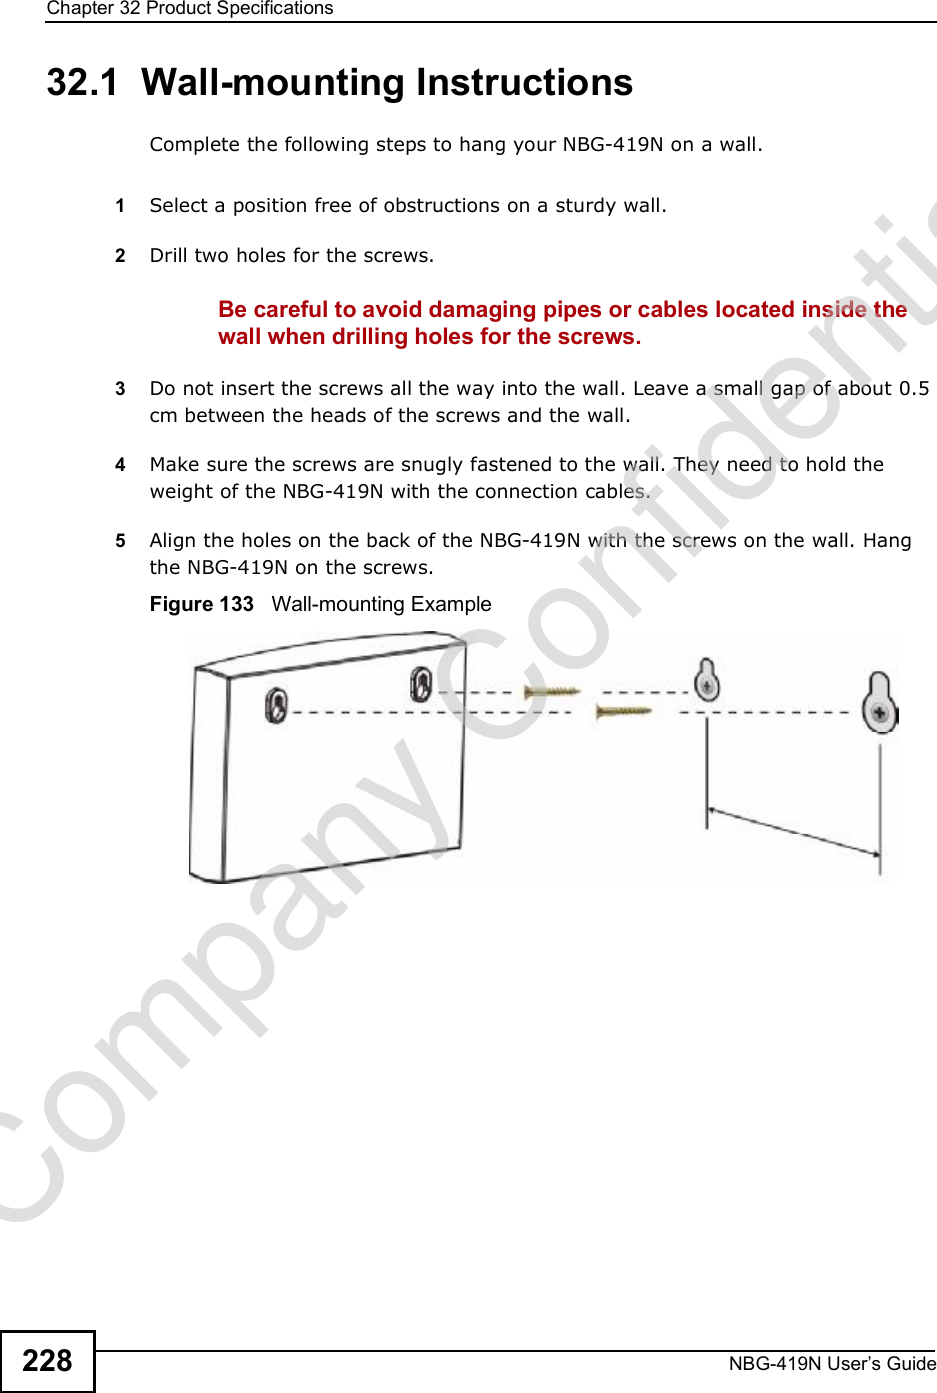 Chapter 32Product SpecificationsNBG-419N User s Guide22832.1  Wall-mounting InstructionsComplete the following steps to hang your NBG-419N on a wall.1Select a position free of obstructions on a sturdy wall. 2Drill two holes for the screws. Be careful to avoid damaging pipes or cables located inside the wall when drilling holes for the screws.3Do not insert the screws all the way into the wall. Leave a small gap of about 0.5 cm between the heads of the screws and the wall. 4Make sure the screws are snugly fastened to the wall. They need to hold the weight of the NBG-419N with the connection cables. 5Align the holes on the back of the NBG-419N with the screws on the wall. Hang the NBG-419N on the screws.Figure 133   Wall-mounting ExampleCompany Confidential